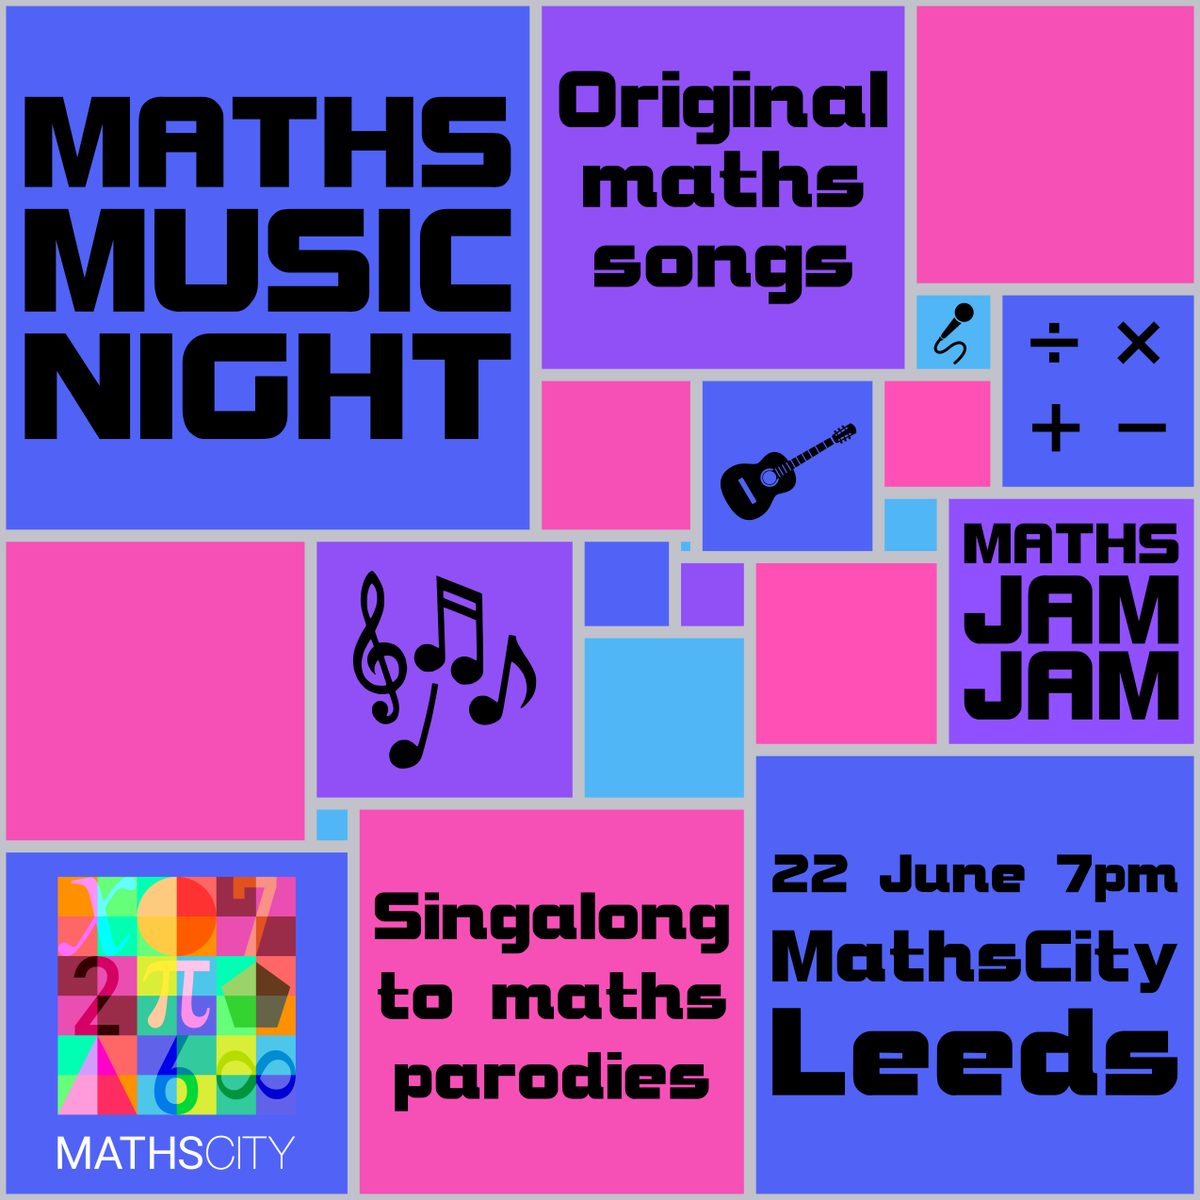 **Tickets now available!** On Sat 22 June I'll be hosting a maths music night at MathsCity in Leeds. A chilled-out evening of maths songs that you can sing along to in the style of MathsJamJam, along with performances of new original songs. Tickets: eventbrite.co.uk/e/maths-music-…